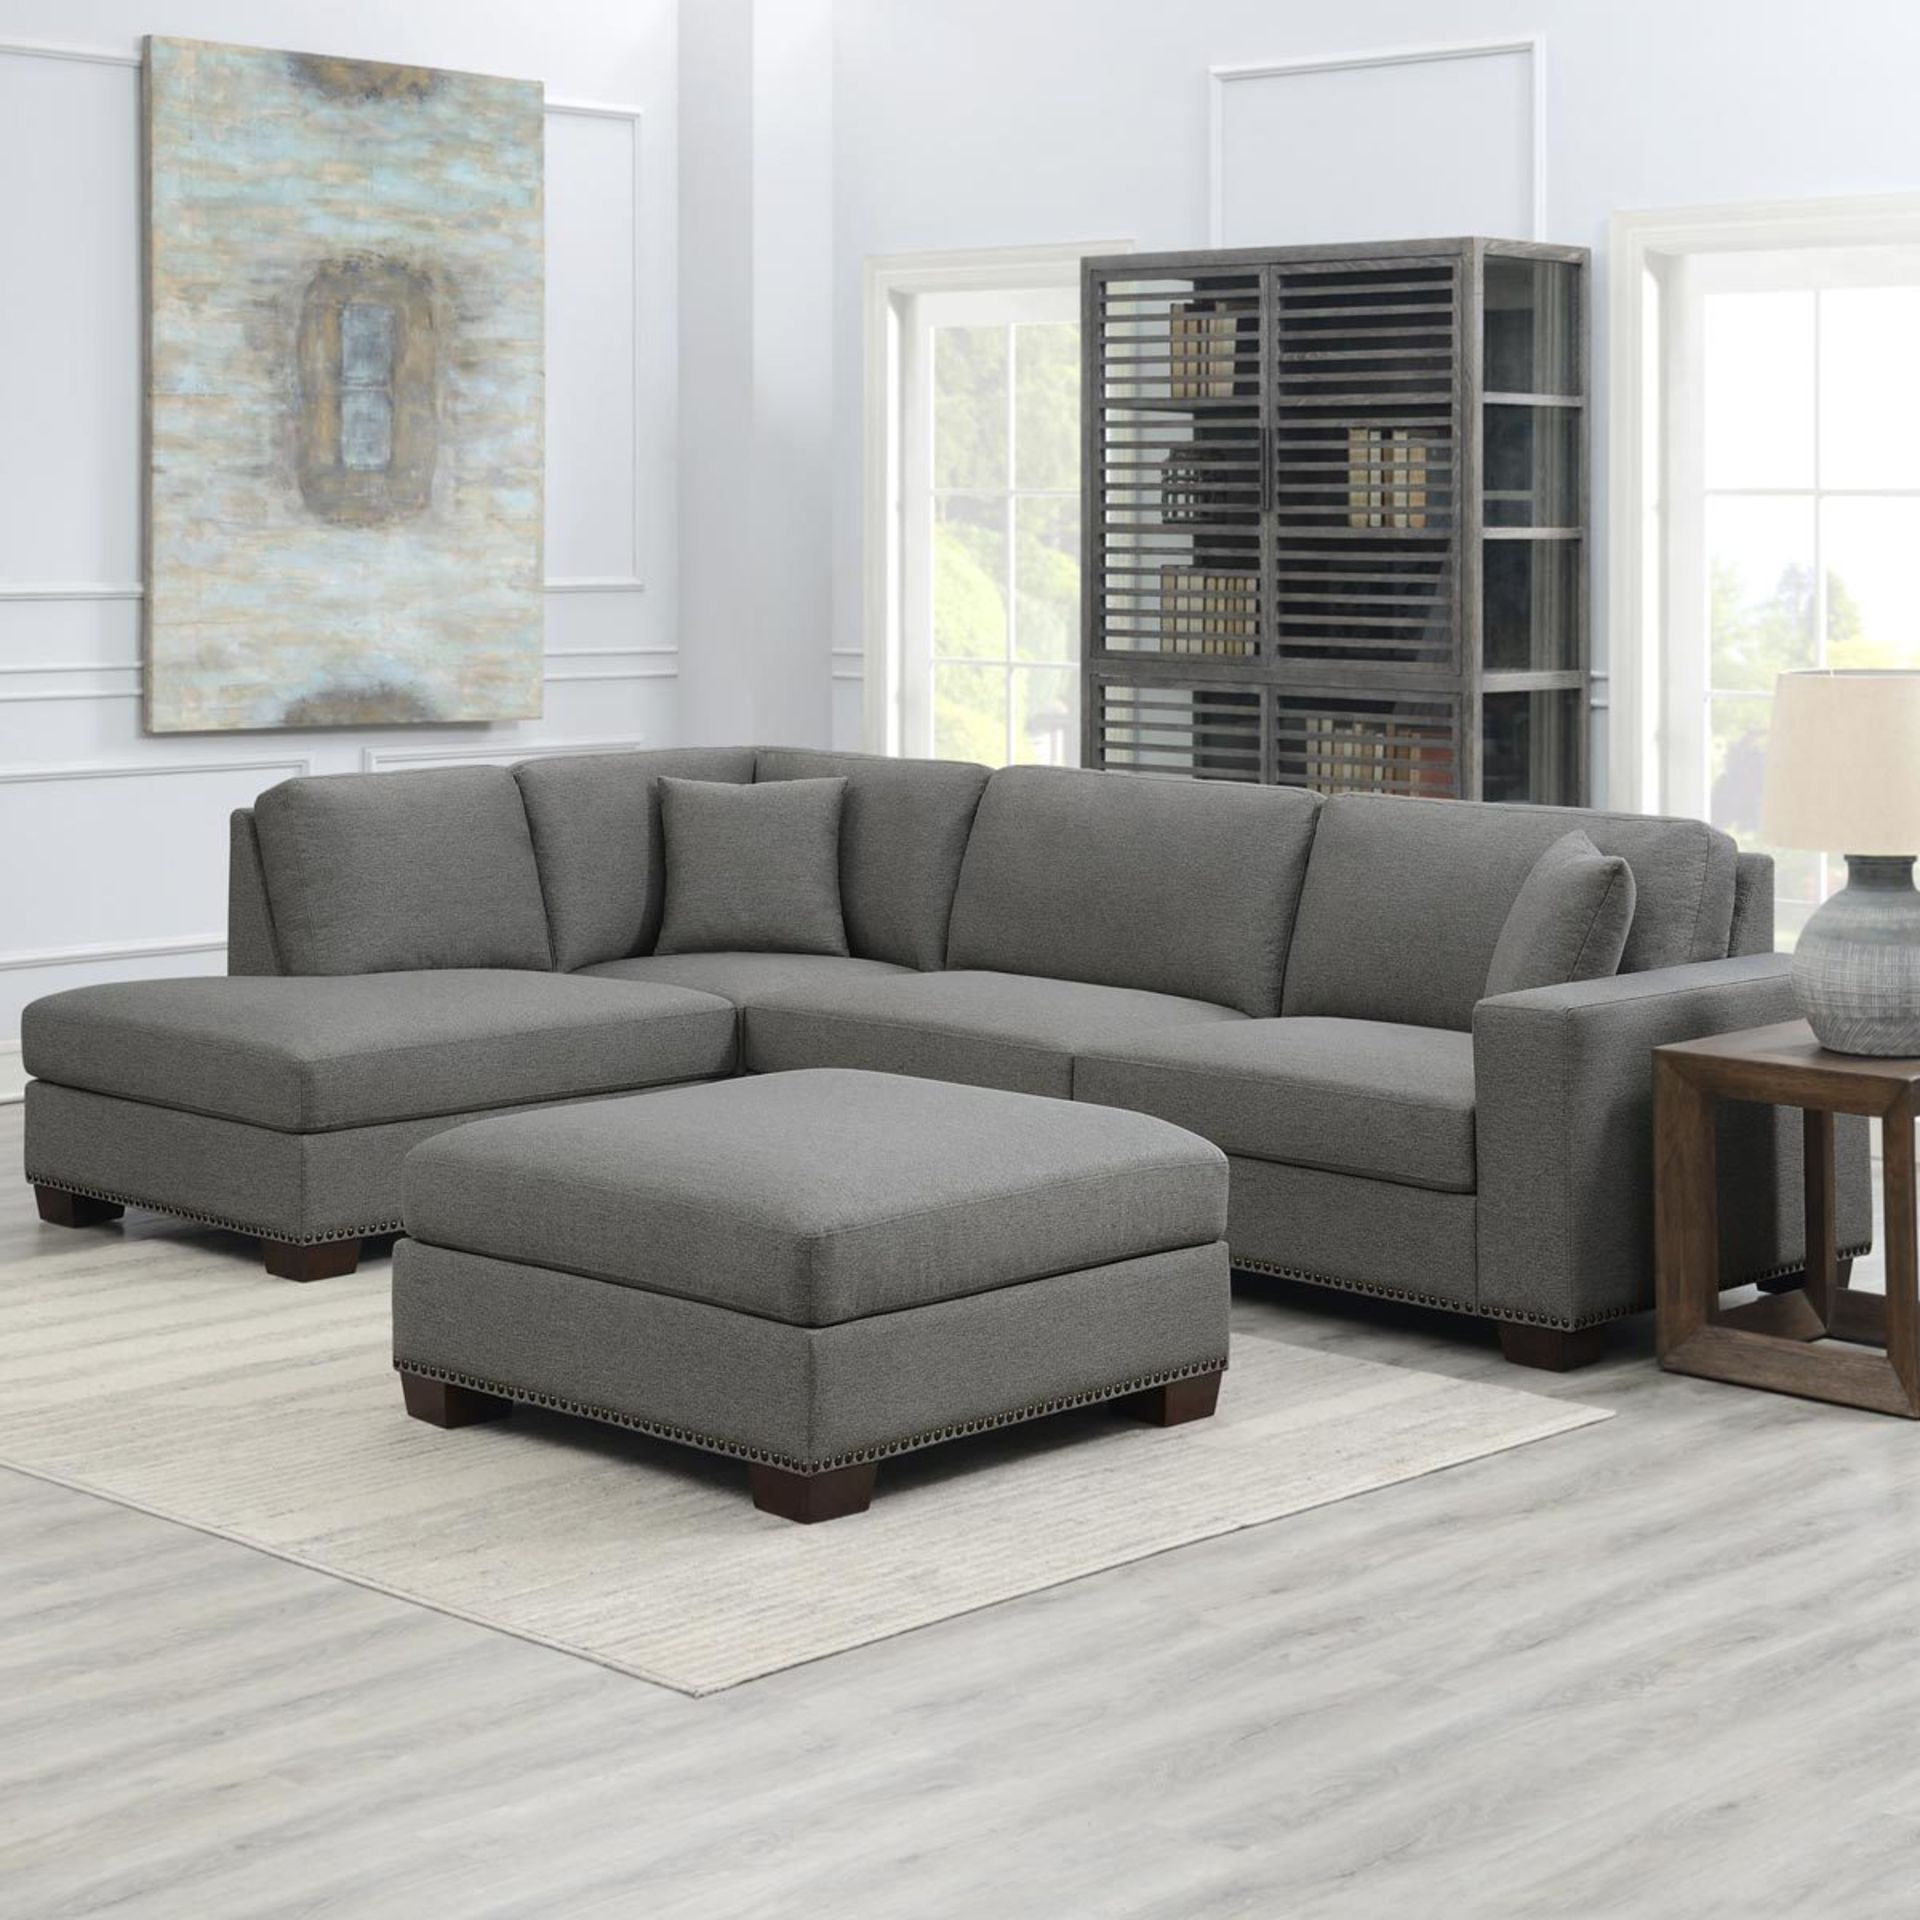 1 THOMASVILLE ARTESIA DARK GREY FABRIC SECTIONAL SOFA RRP Â£1299 (PICTURES FOR ILLUSTRATION PURPOSES